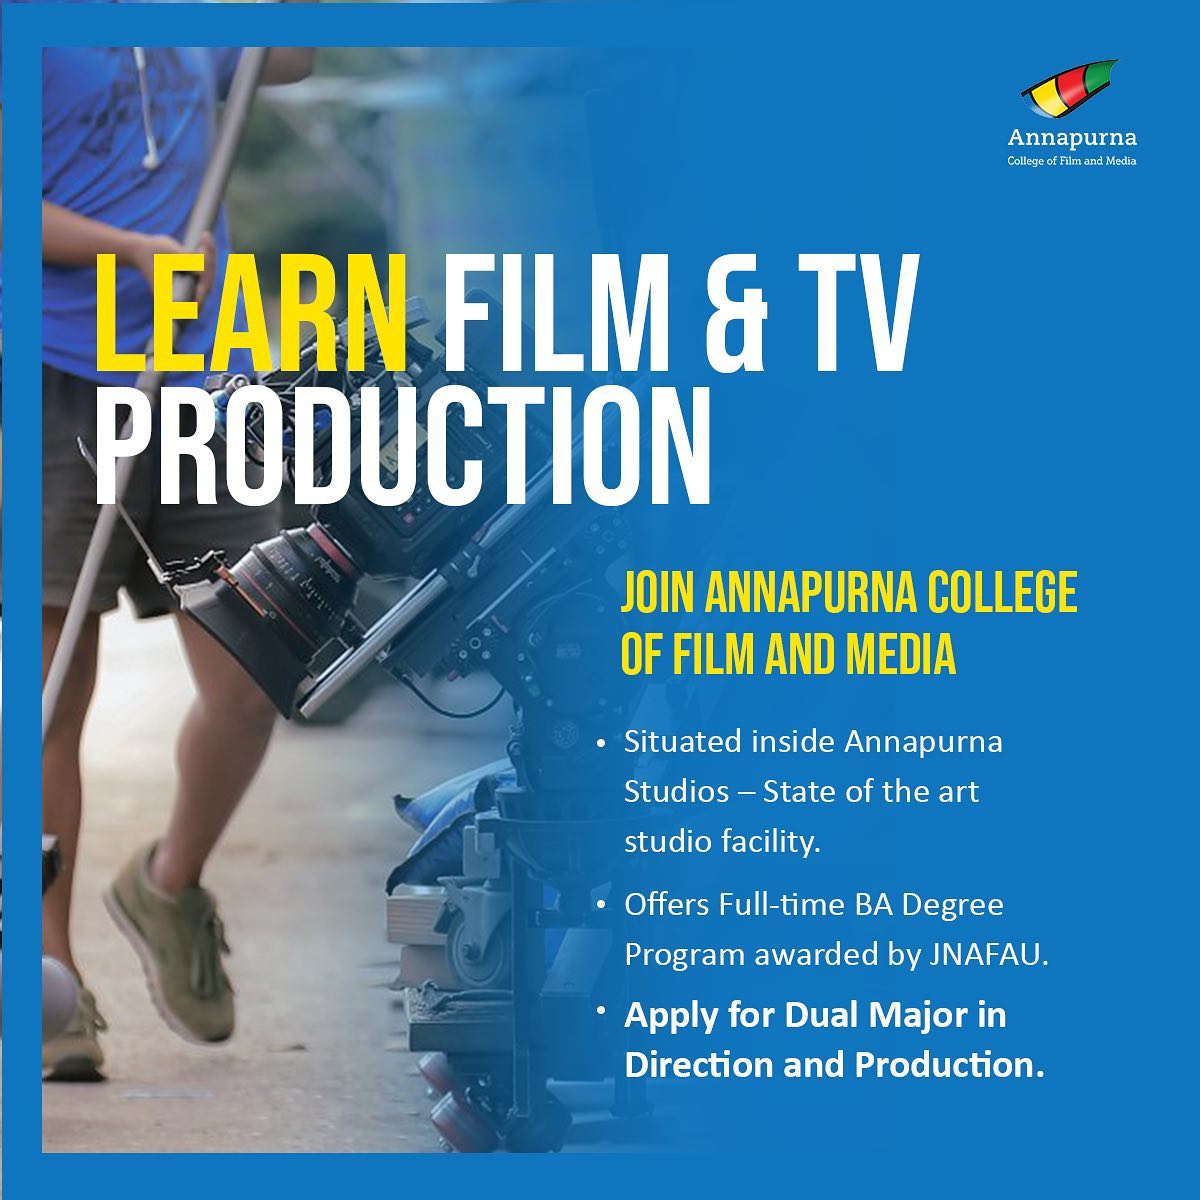 Annapurna College of Film and Media (@acfmofficial) / Twitter